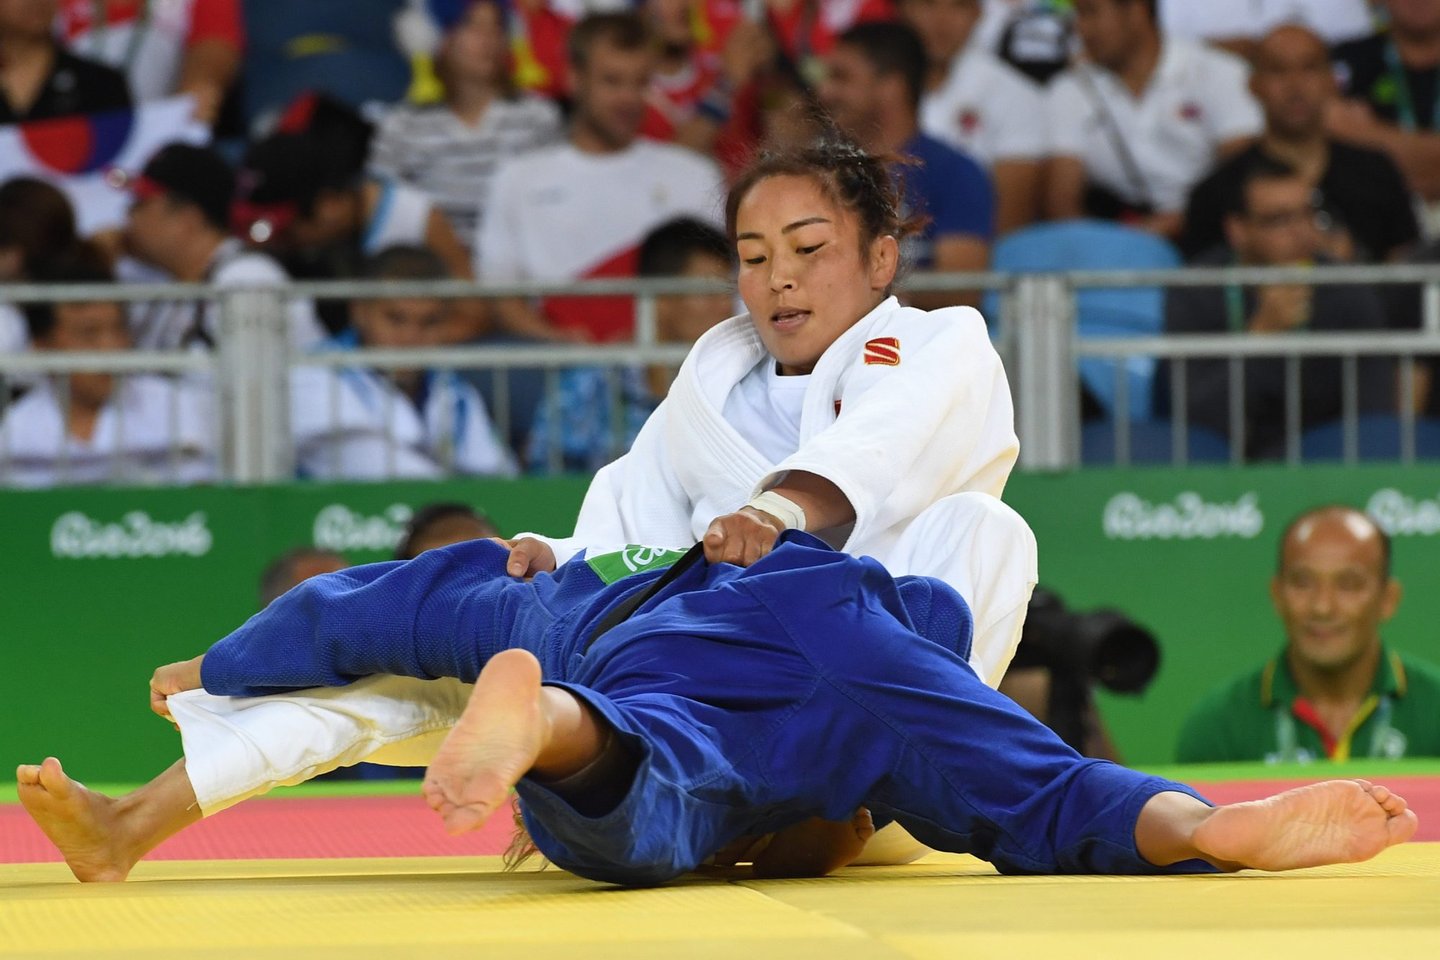 Mongolia's Sumiya Dorjsuren (white) competes with Portugal's Telma Monteiro during their women's -57kg judo contest quarterfinal match of the Rio 2016 Olympic Games in Rio de Janeiro on August 8, 2016. / AFP / Toshifumi KITAMURA (Photo credit should read TOSHIFUMI KITAMURA/AFP/Getty Images)